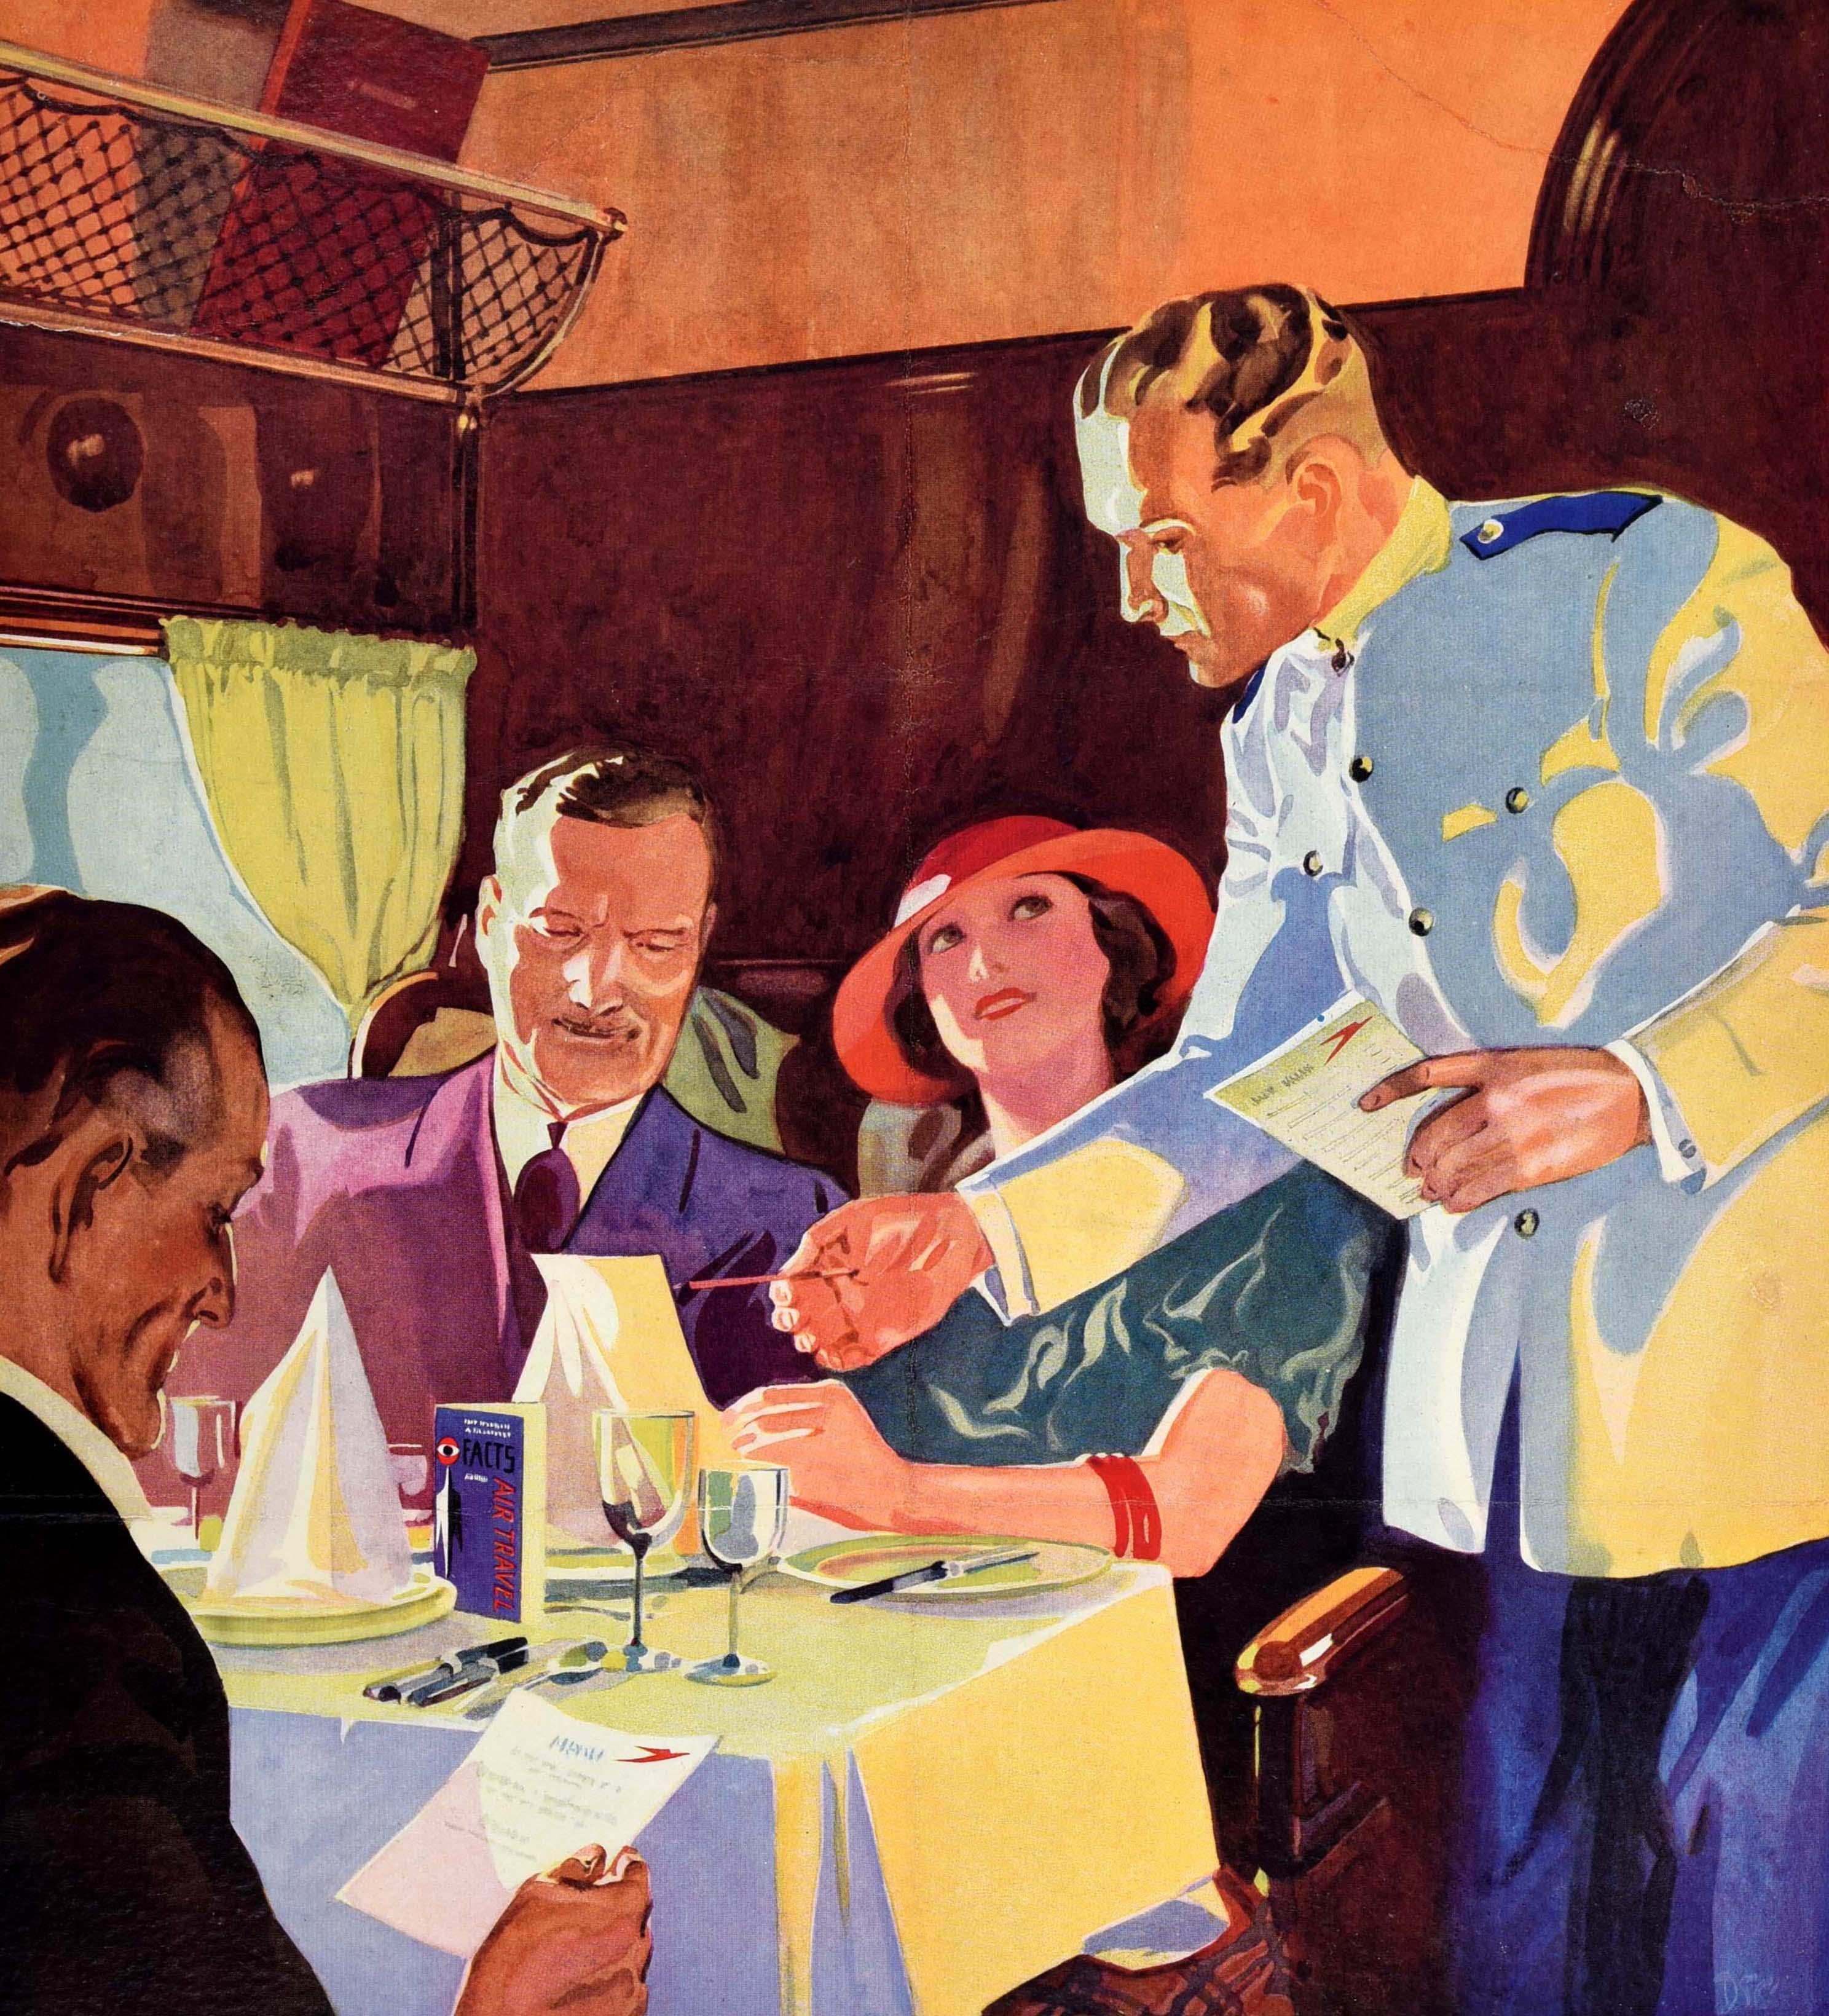 Original vintage travel advertising poster - Imperial Airways Lunching in the Air! The most comfortable air line is Imperial Airways to Europe Africa Asia Australia - featuring a flight attendant waiter taking an order from three smartly dressed